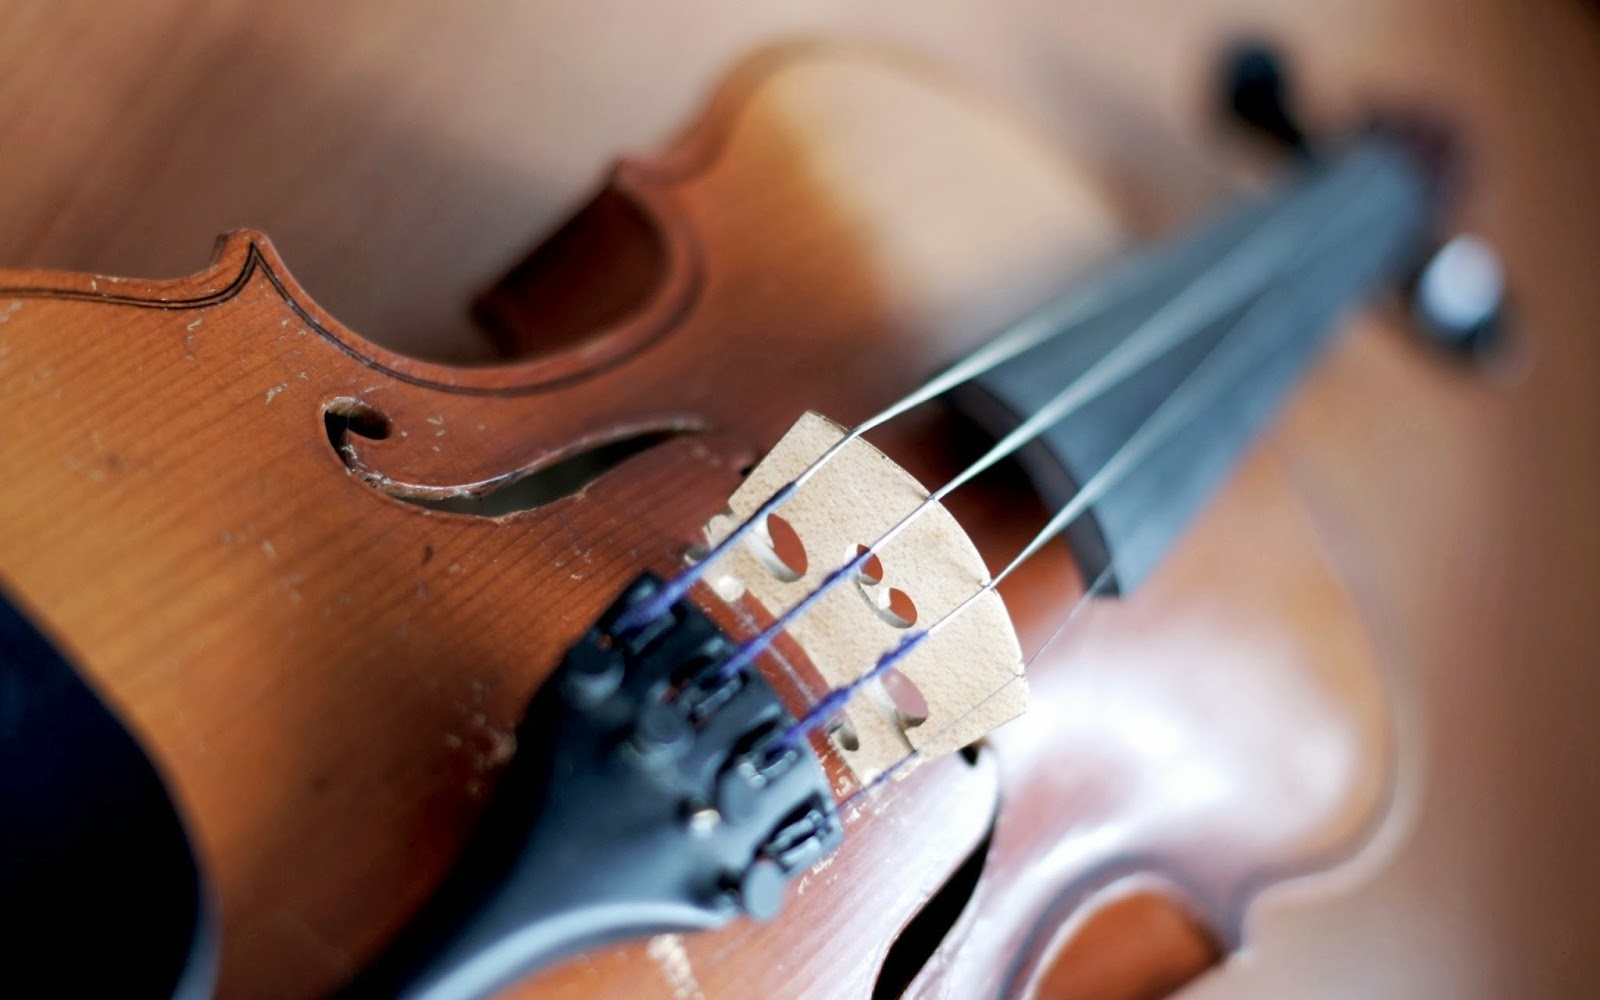 HD Wallpapers Pics: Violin Pictures